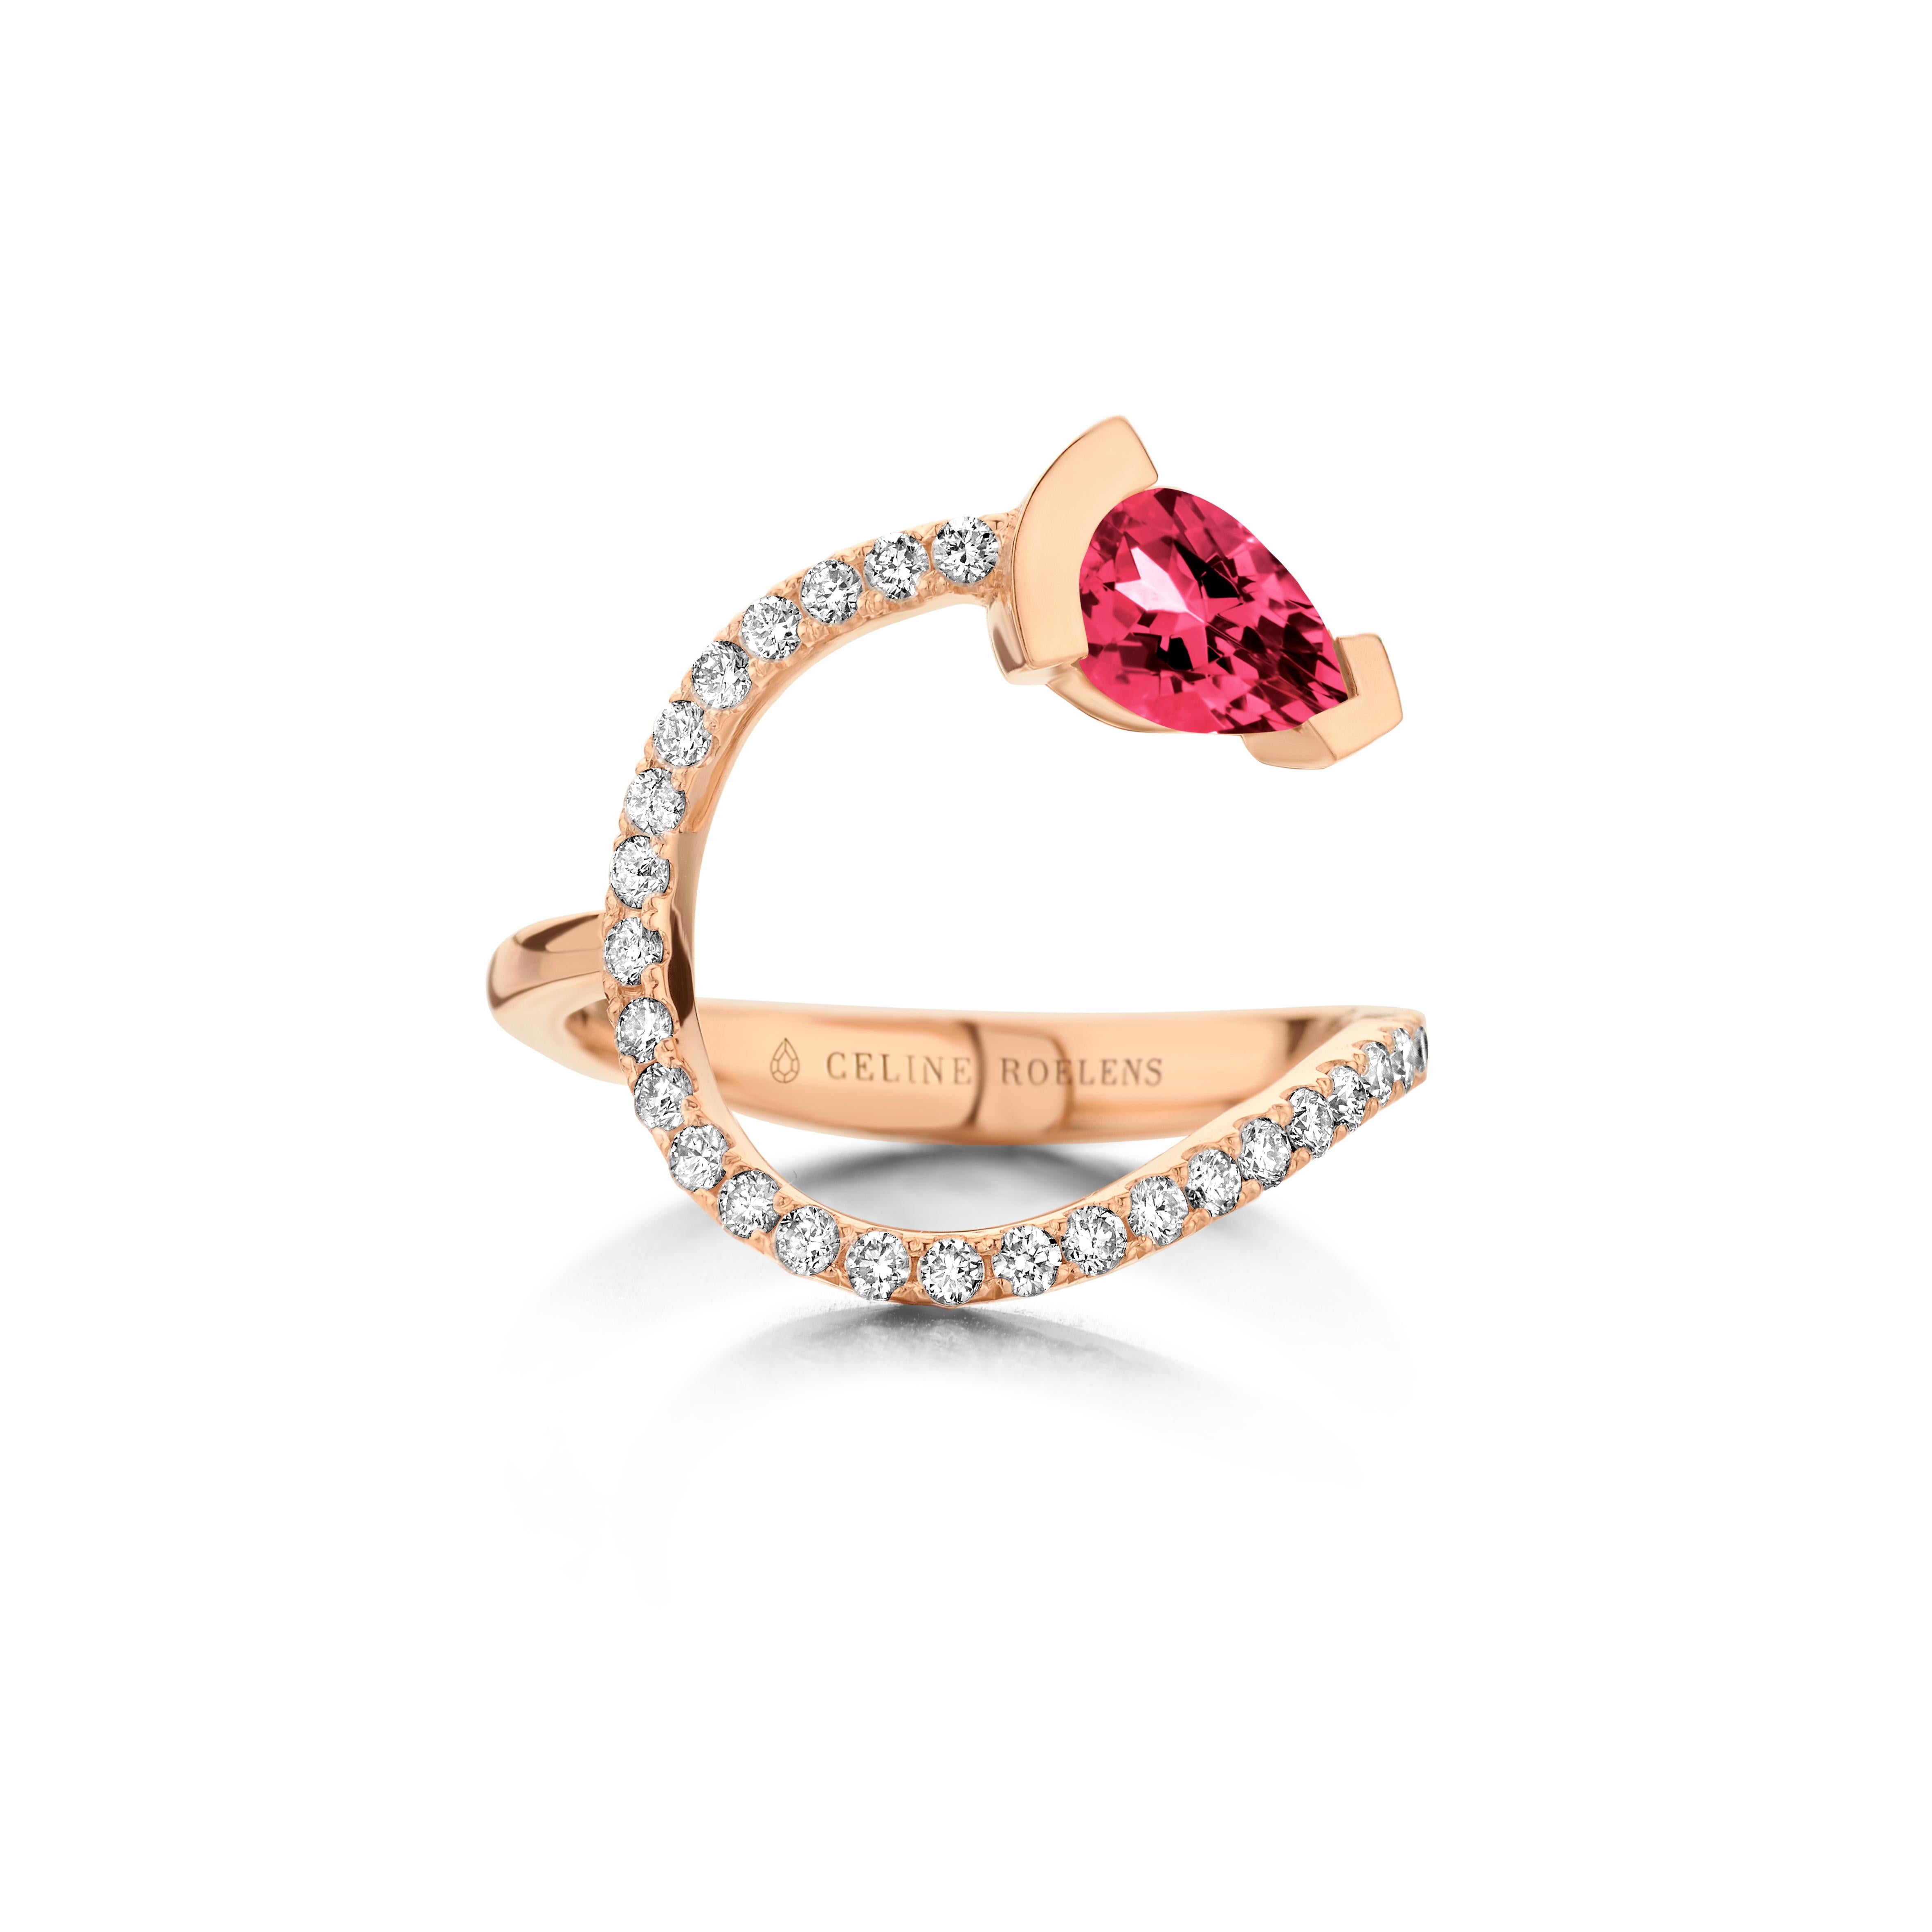 ADELINE curved ring in 18Kt white gold set with a pear shaped Rubellite and 0,33 Ct of white brilliant cut diamonds - VS F quality.